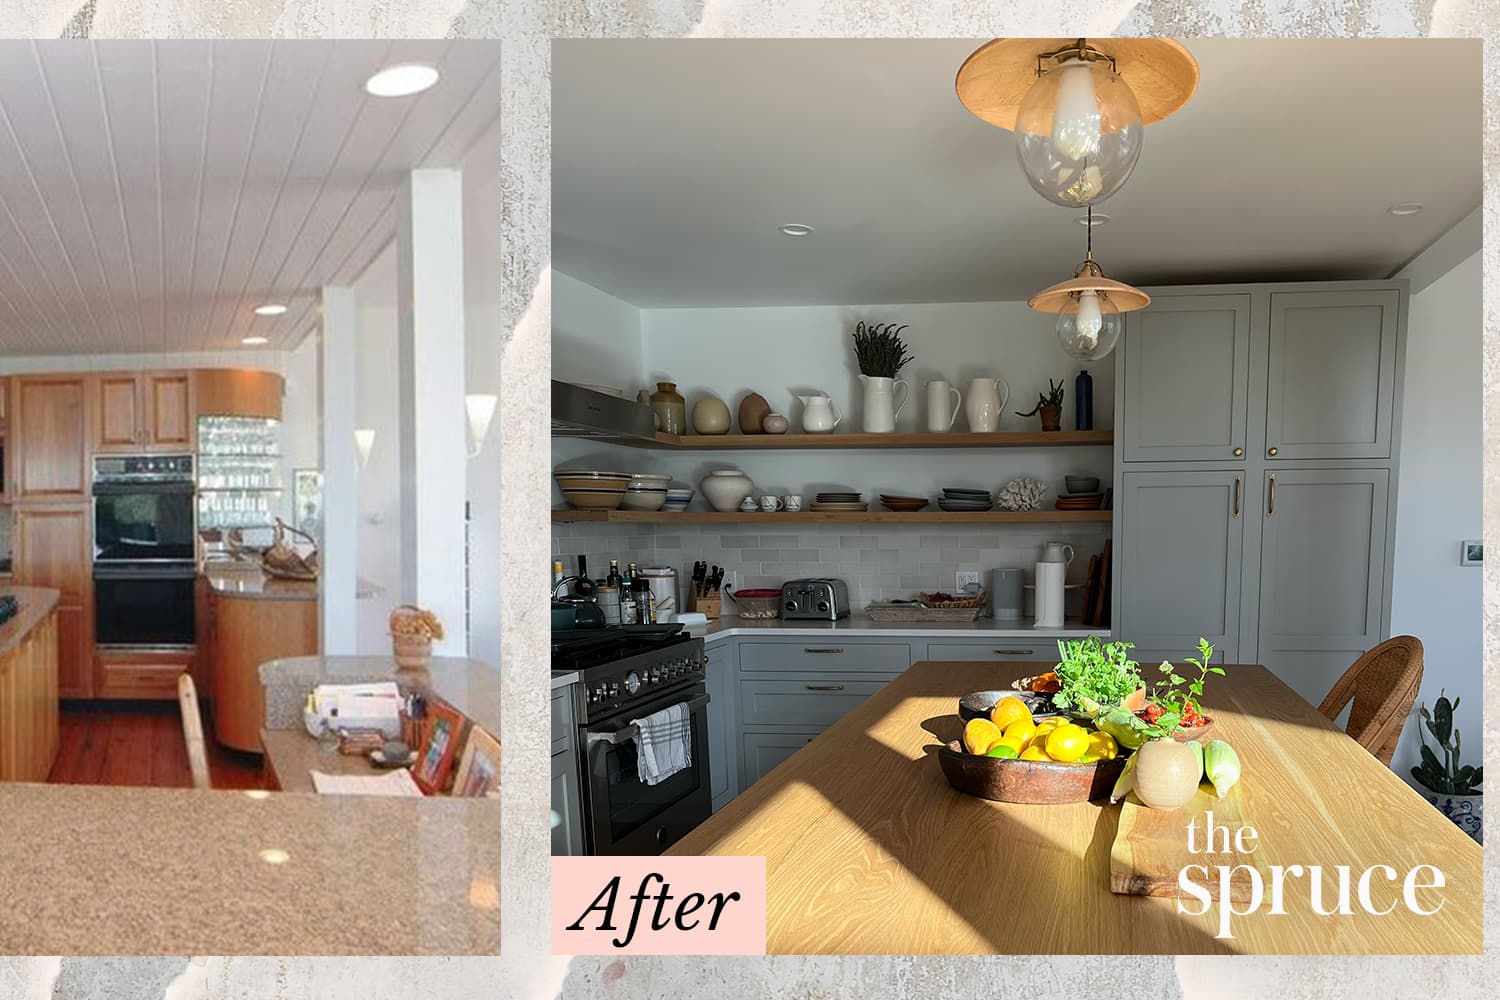 Naomi Watts’ Hamptons Kitchen Renovation Trades the “80s Vibes” for a Beachy Space That Embraces Natural Light